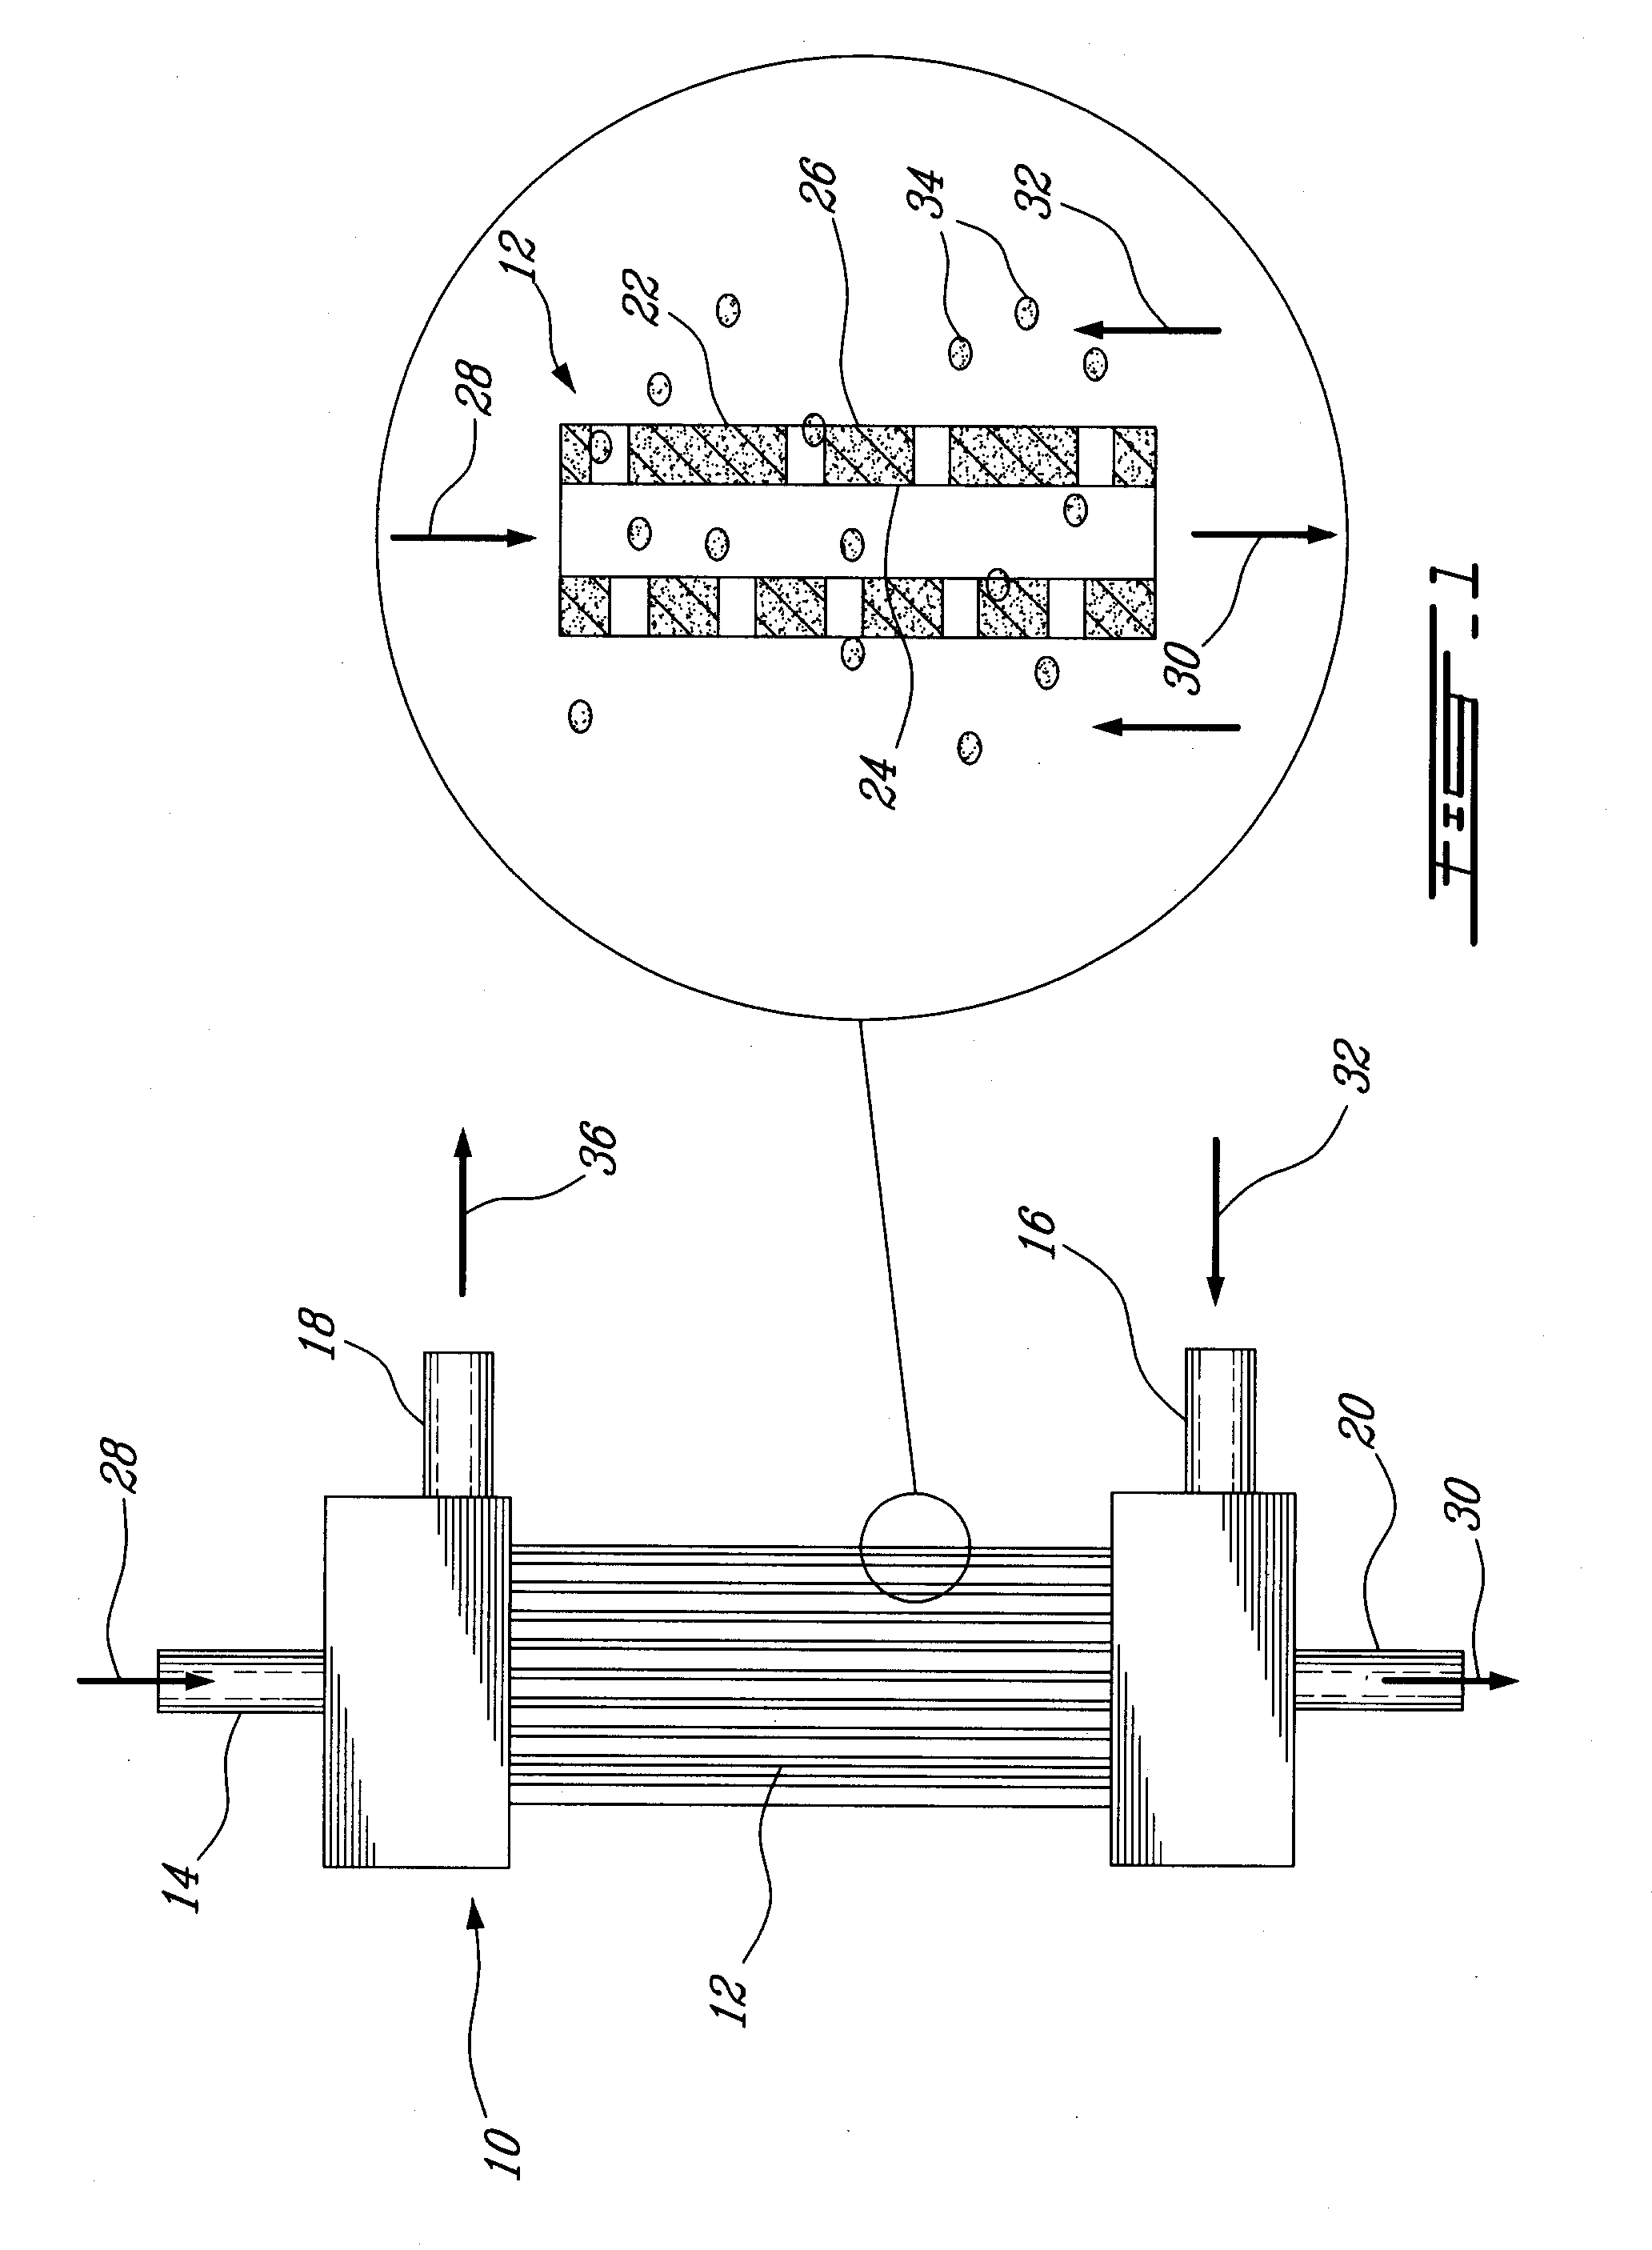 Process for treating pulp mill condenstates using a hollow fiber contactor